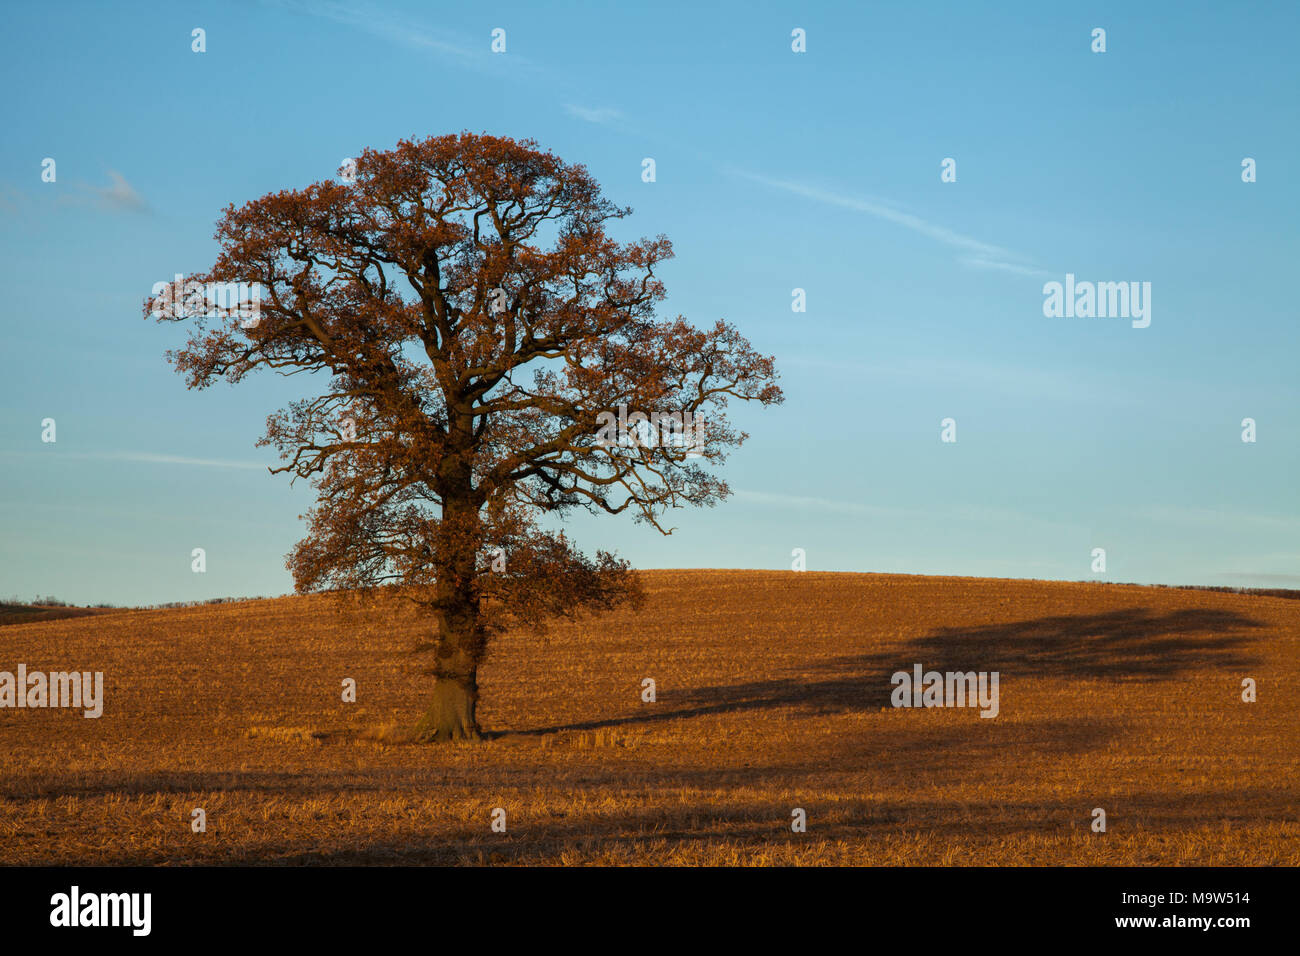 An oak tree in early December hanging on to its golden leaves lit by warm winter sunshine near Holdenby in Northamptonshire, England. Stock Photo